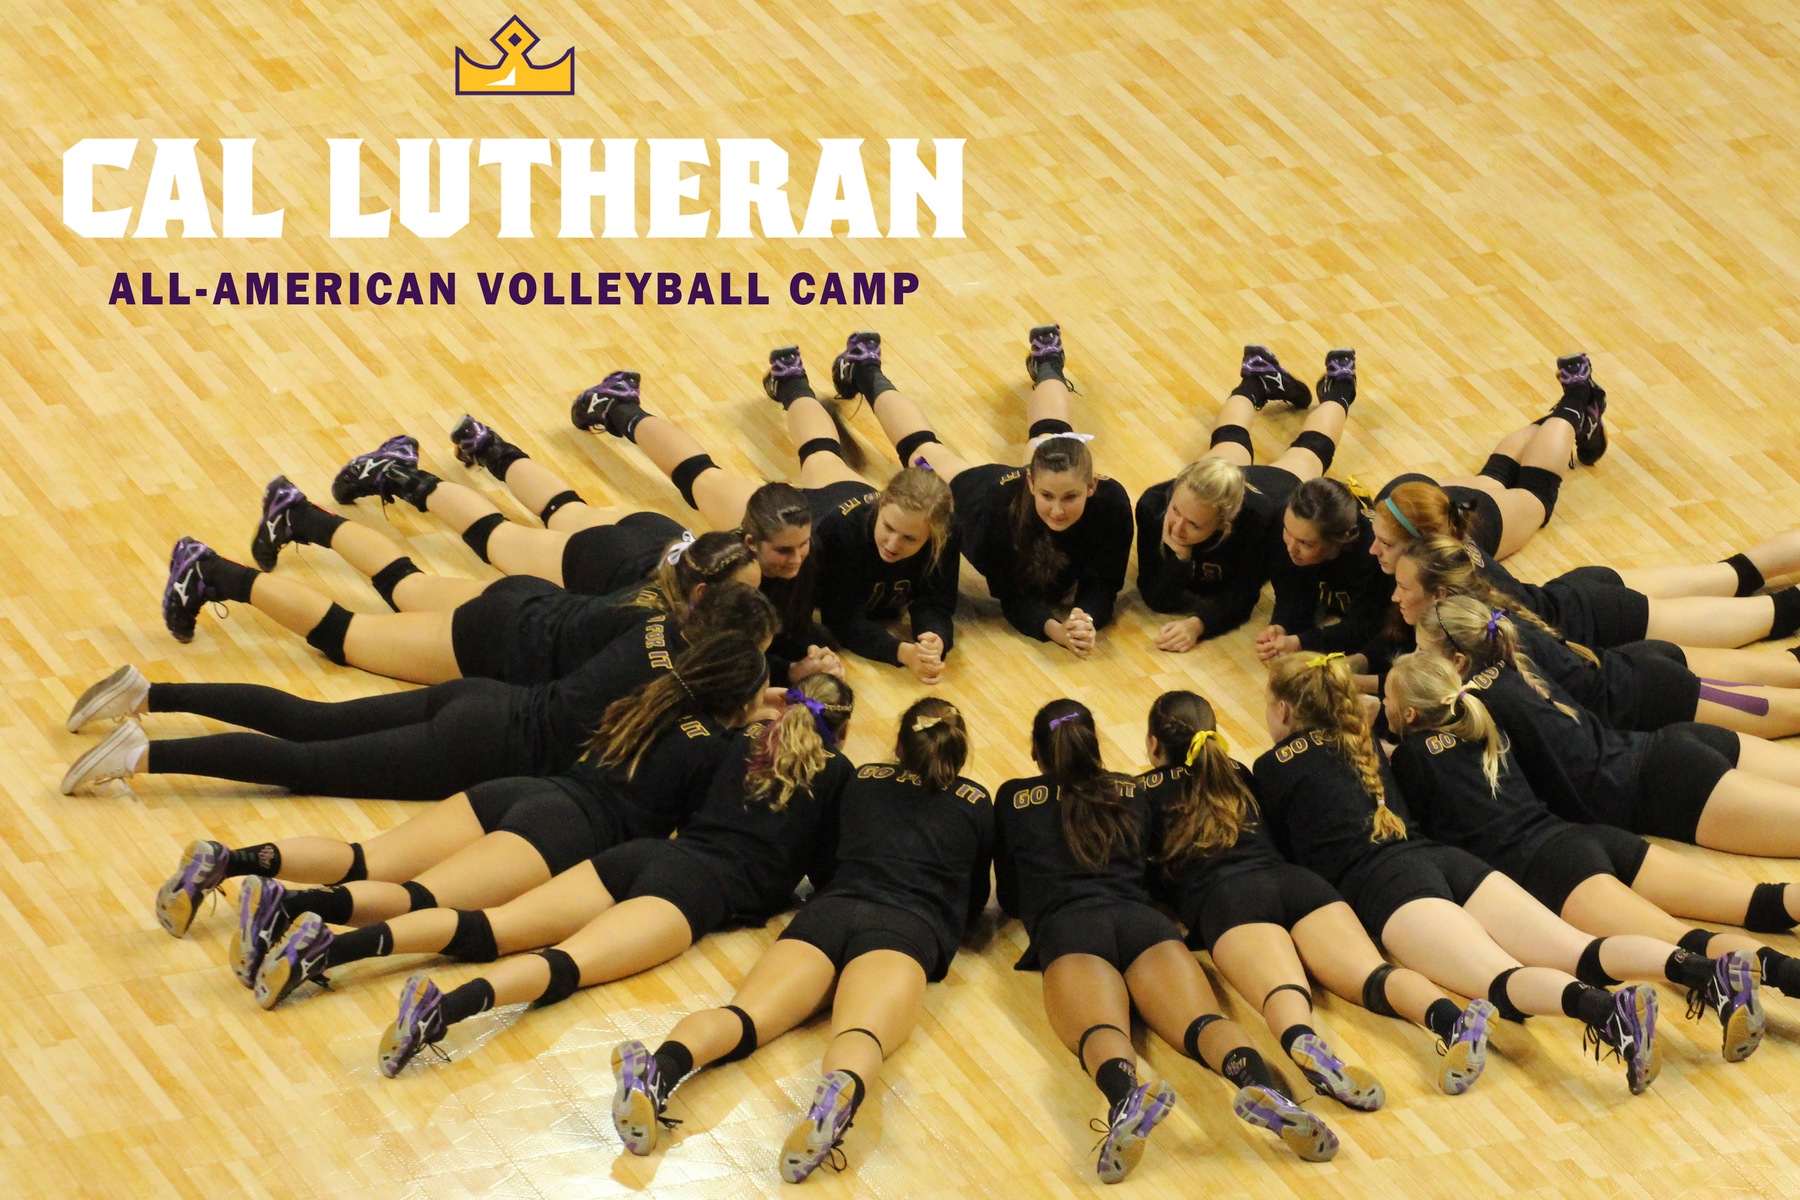 Cal Lutheran All-American Volleyball Camp